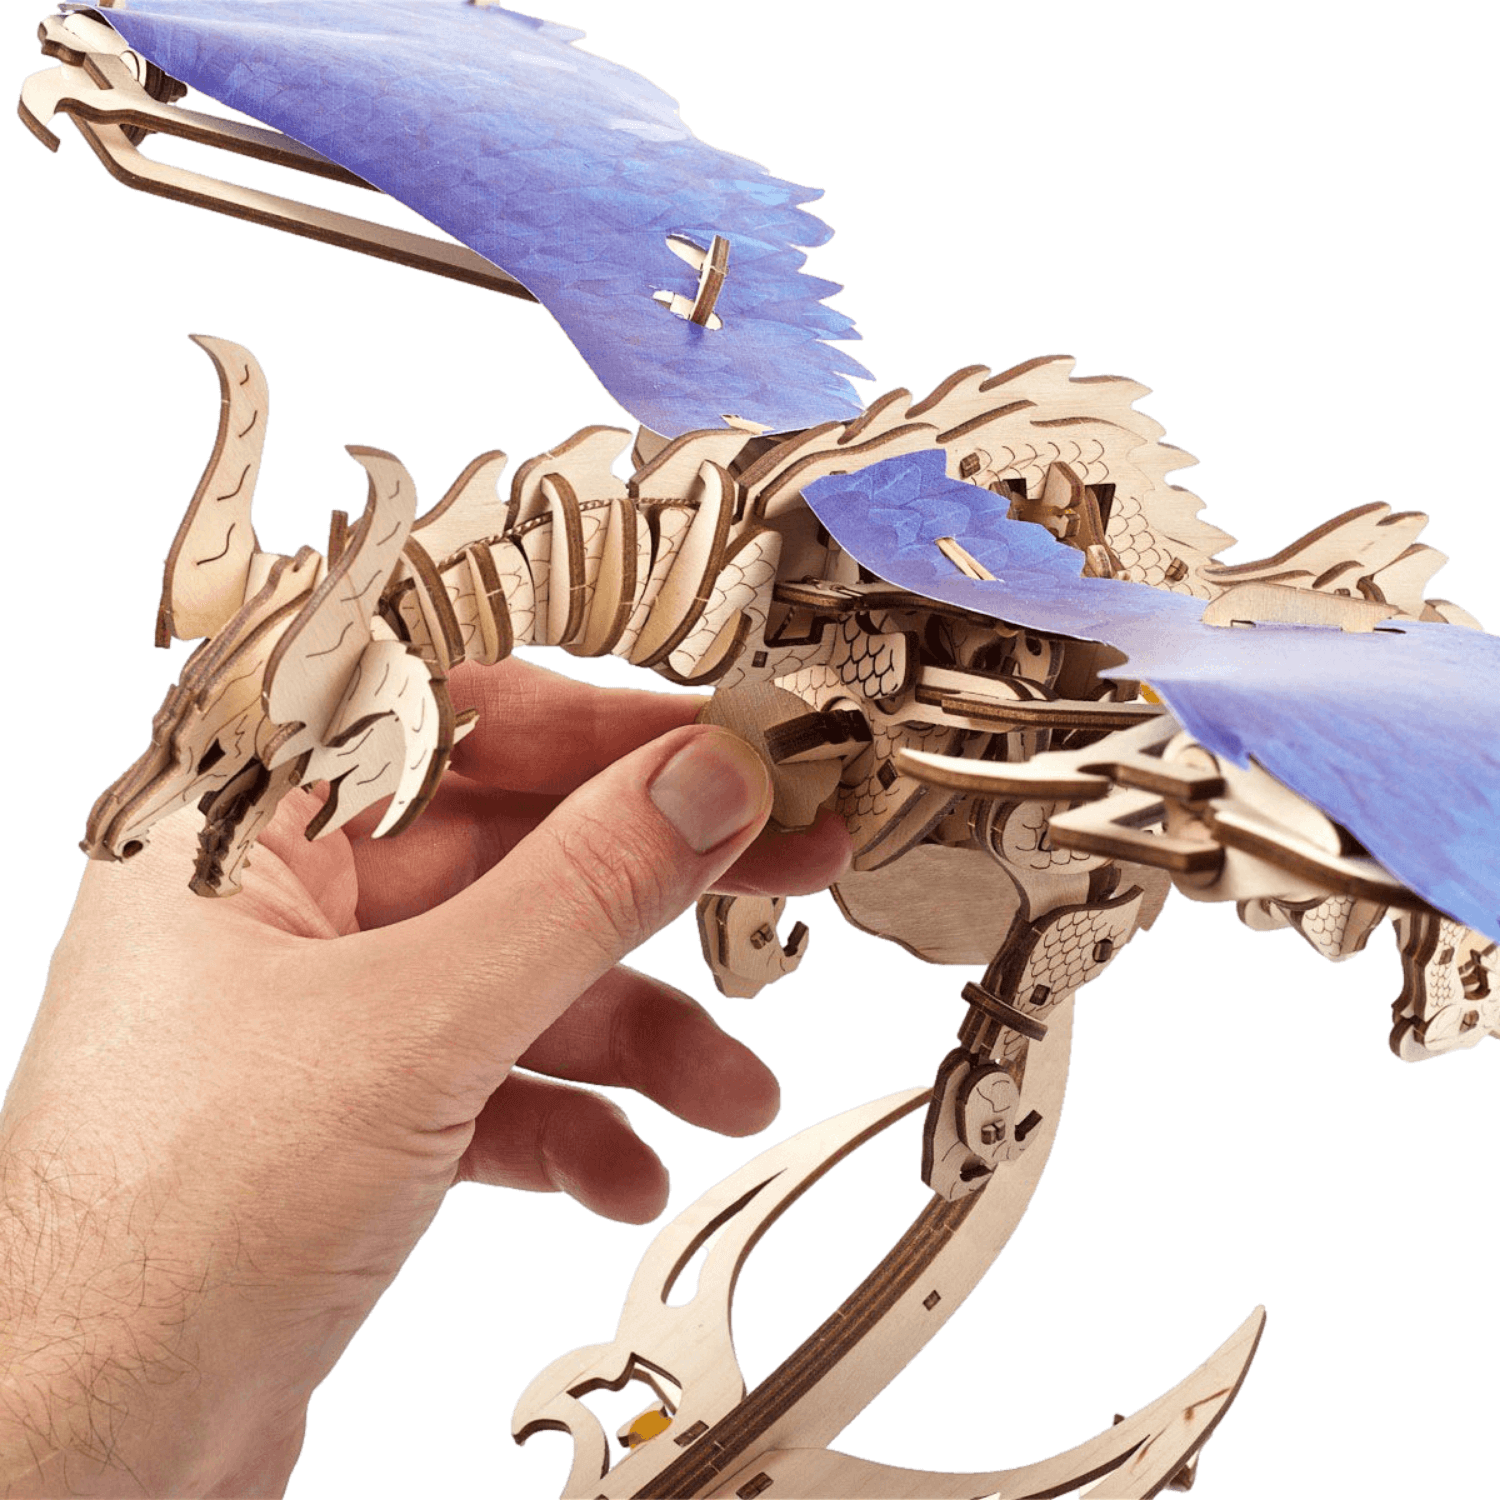 Storm Dragon Mechanical Wooden Puzzle Ugears--